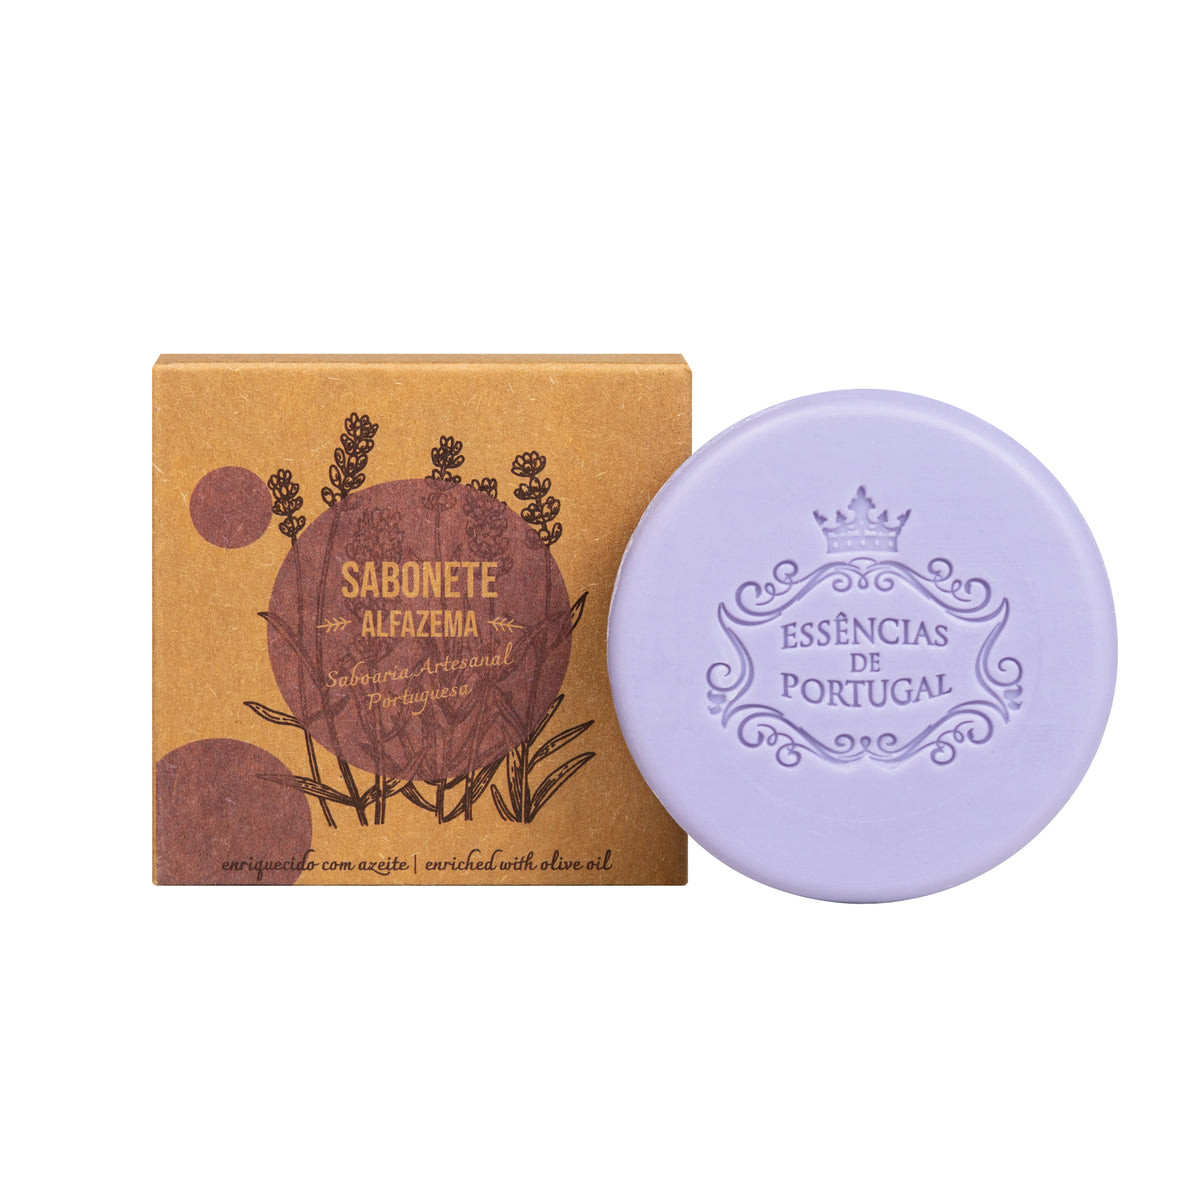 Primary image of Lavender Soap